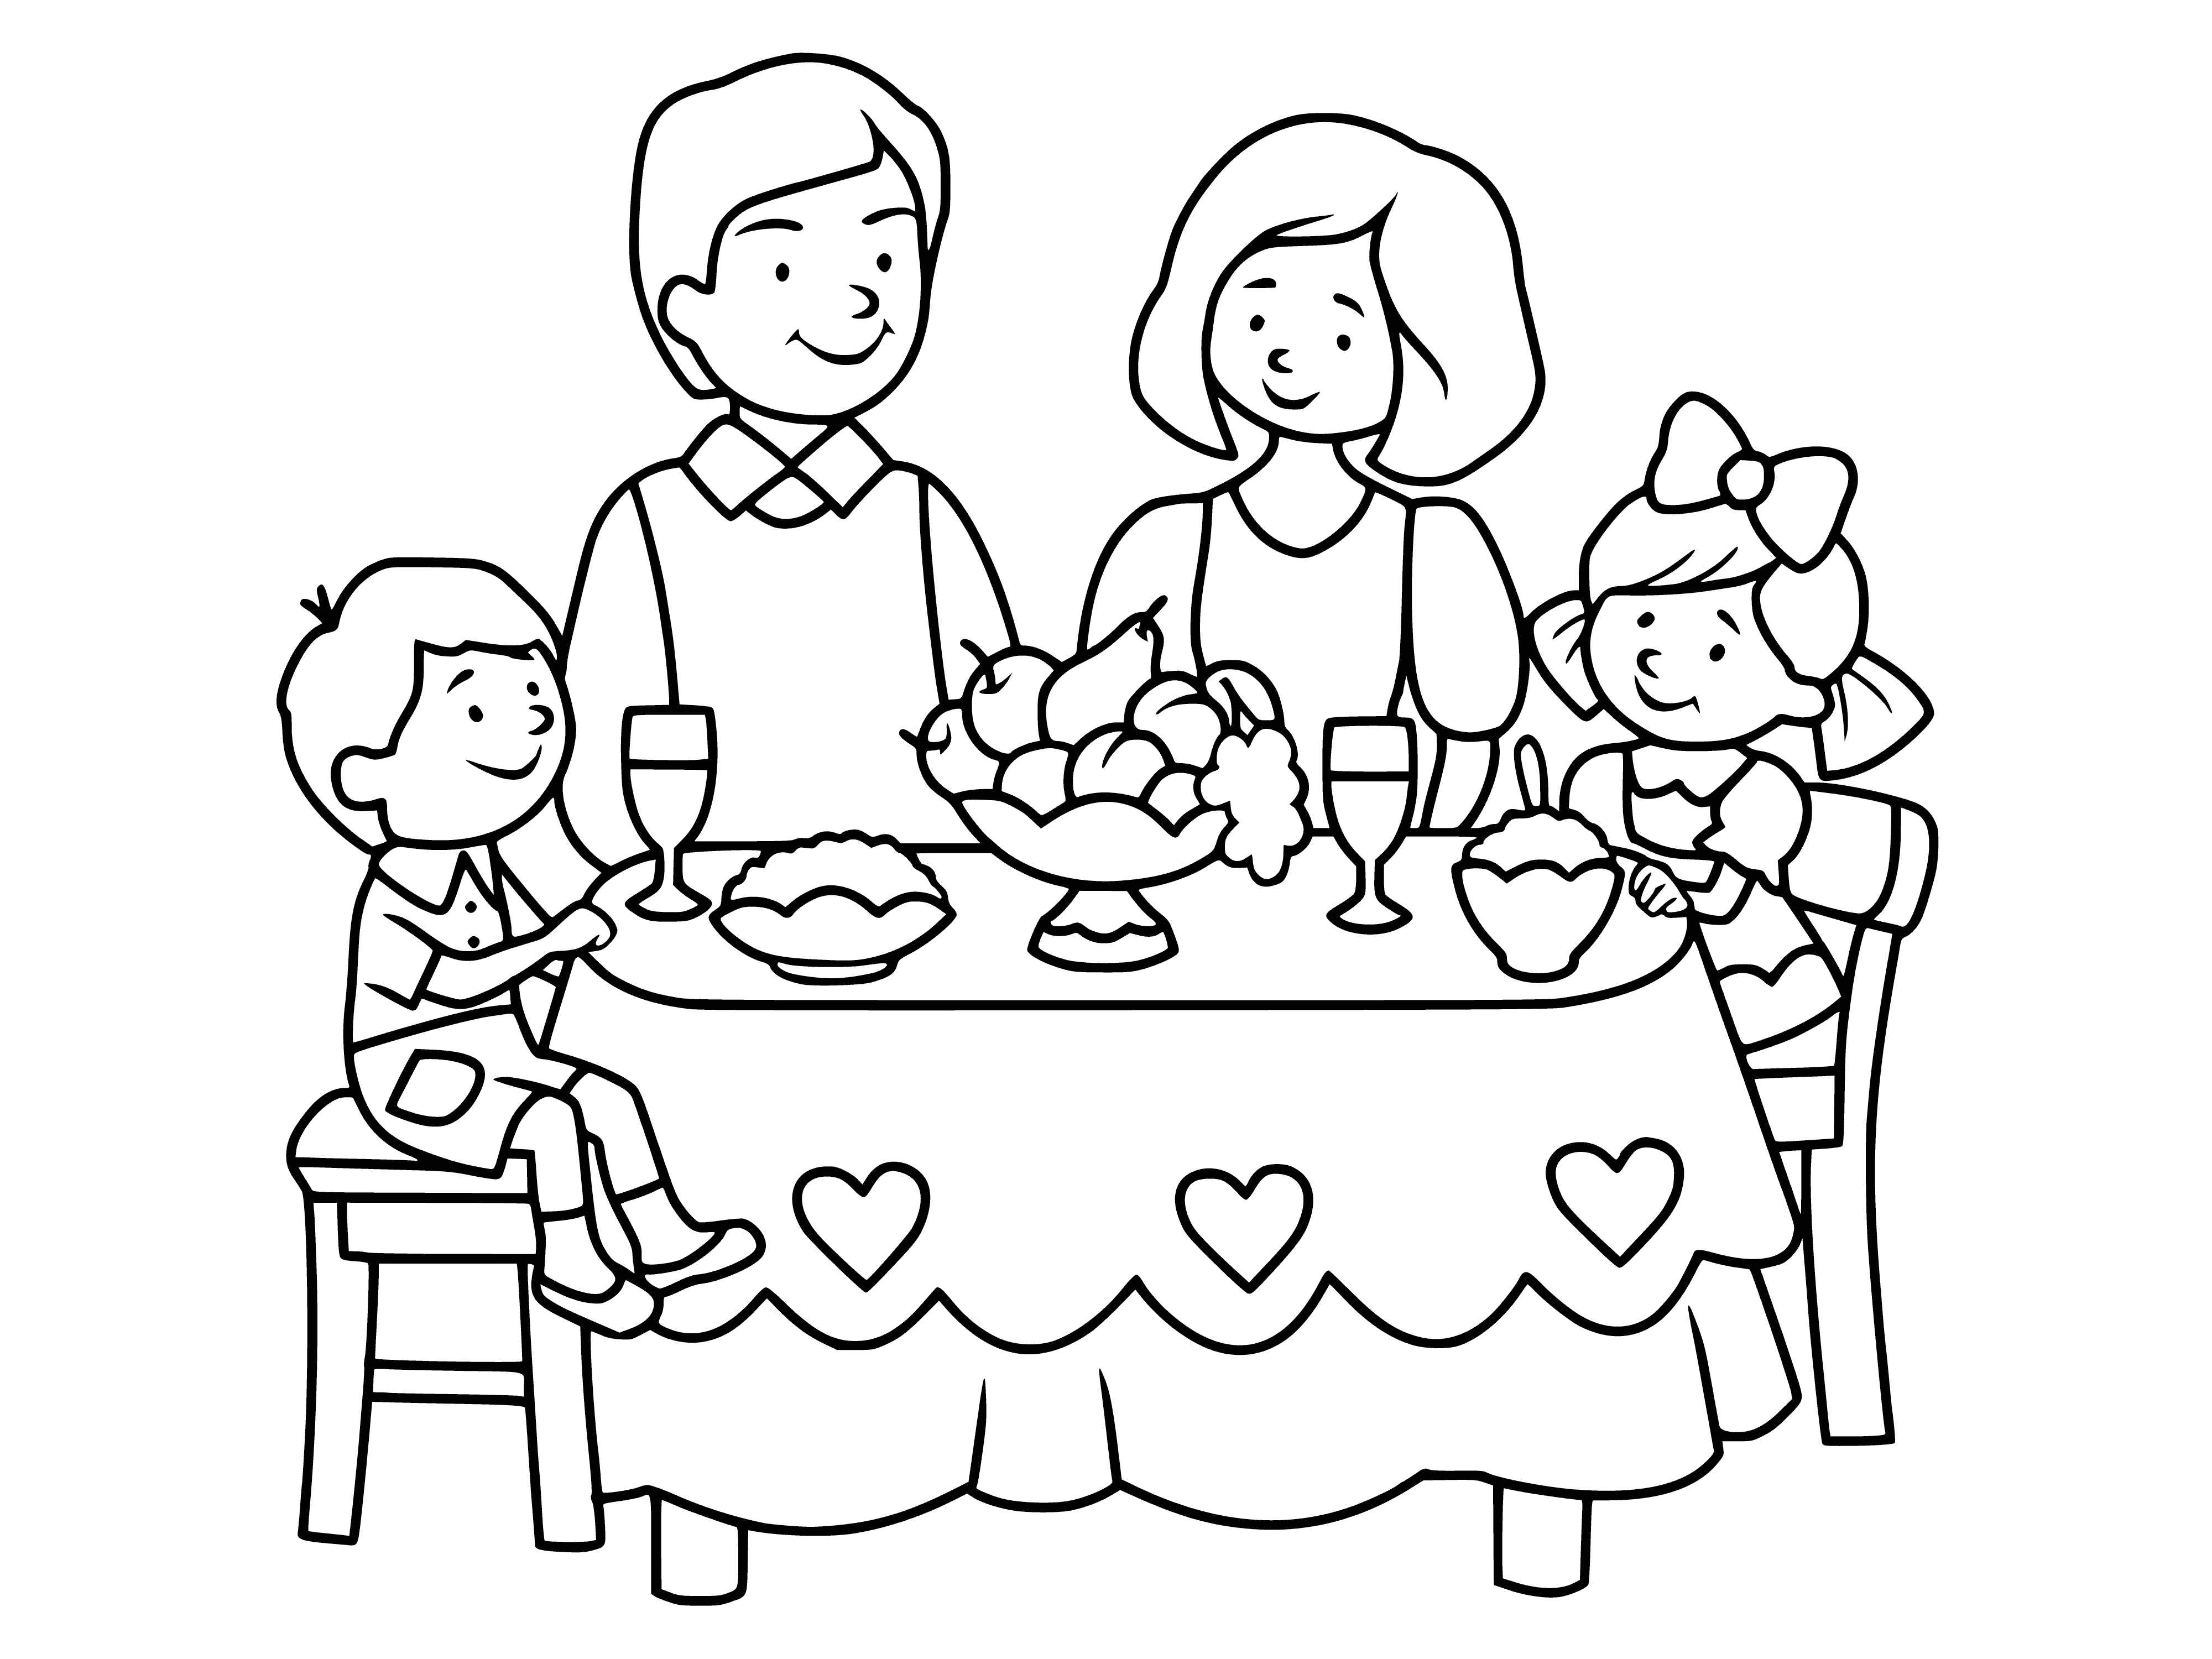 coloring page: Family Day dinner a huge success! Delicious meal enjoyed together, followed by chatting & games - a great way to spend quality time & have fun!